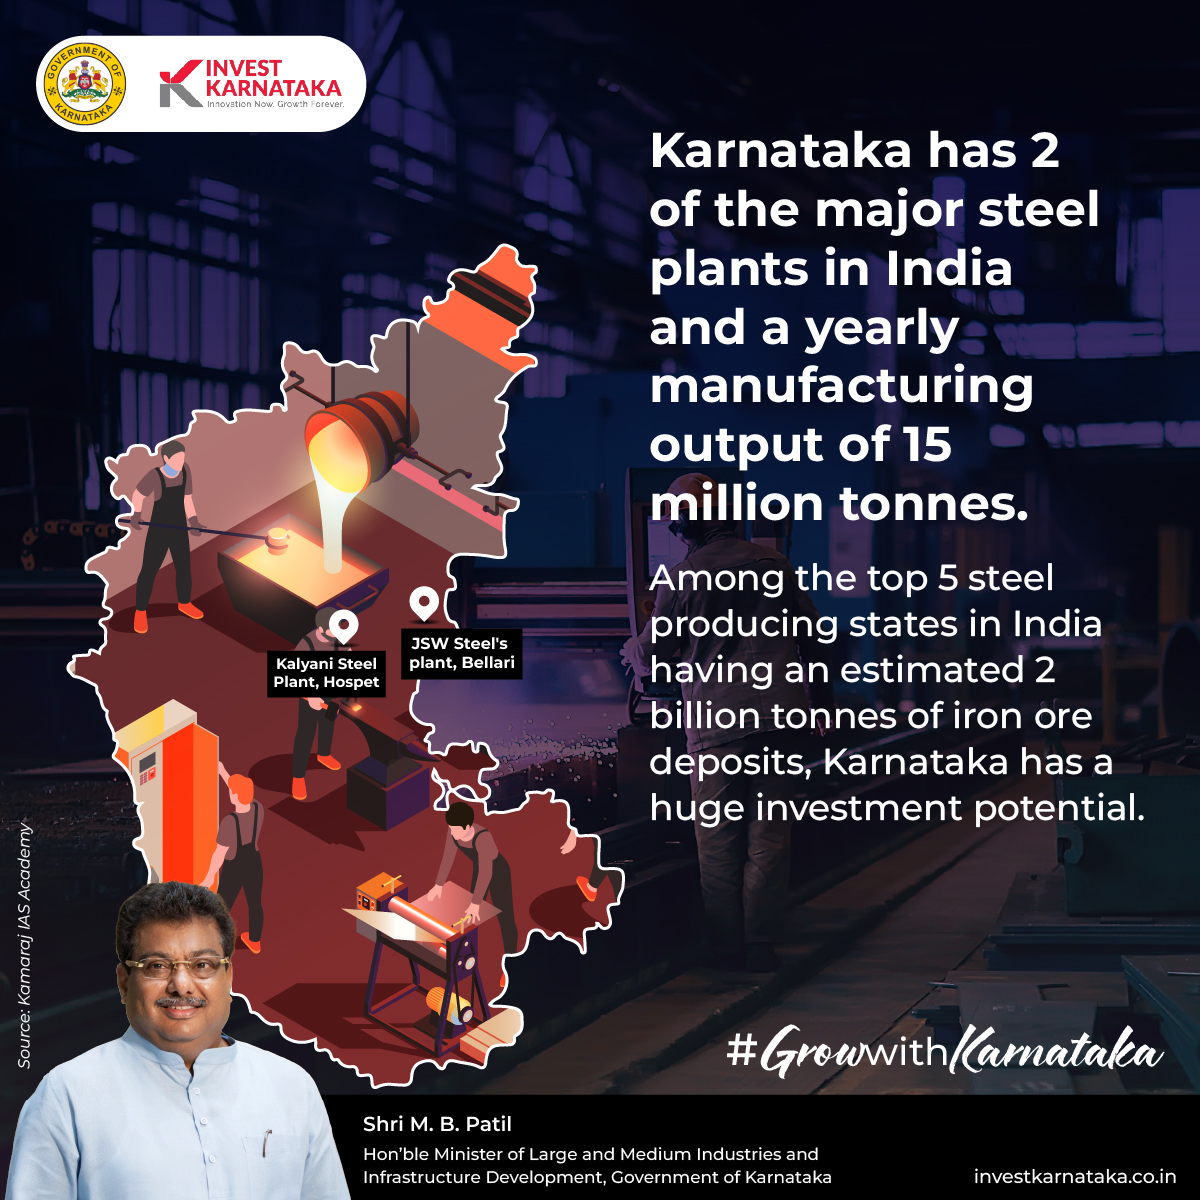 Explore the wealth of opportunities in Karnataka's #miningsector. From rich mineral reserves & world-class infrastructure to innovative technologies & skilled personnel, Karnataka contributes about 13.7% of India’s steel manufacturing output. #KarnatakaForIndia #GrowWithKarnataka